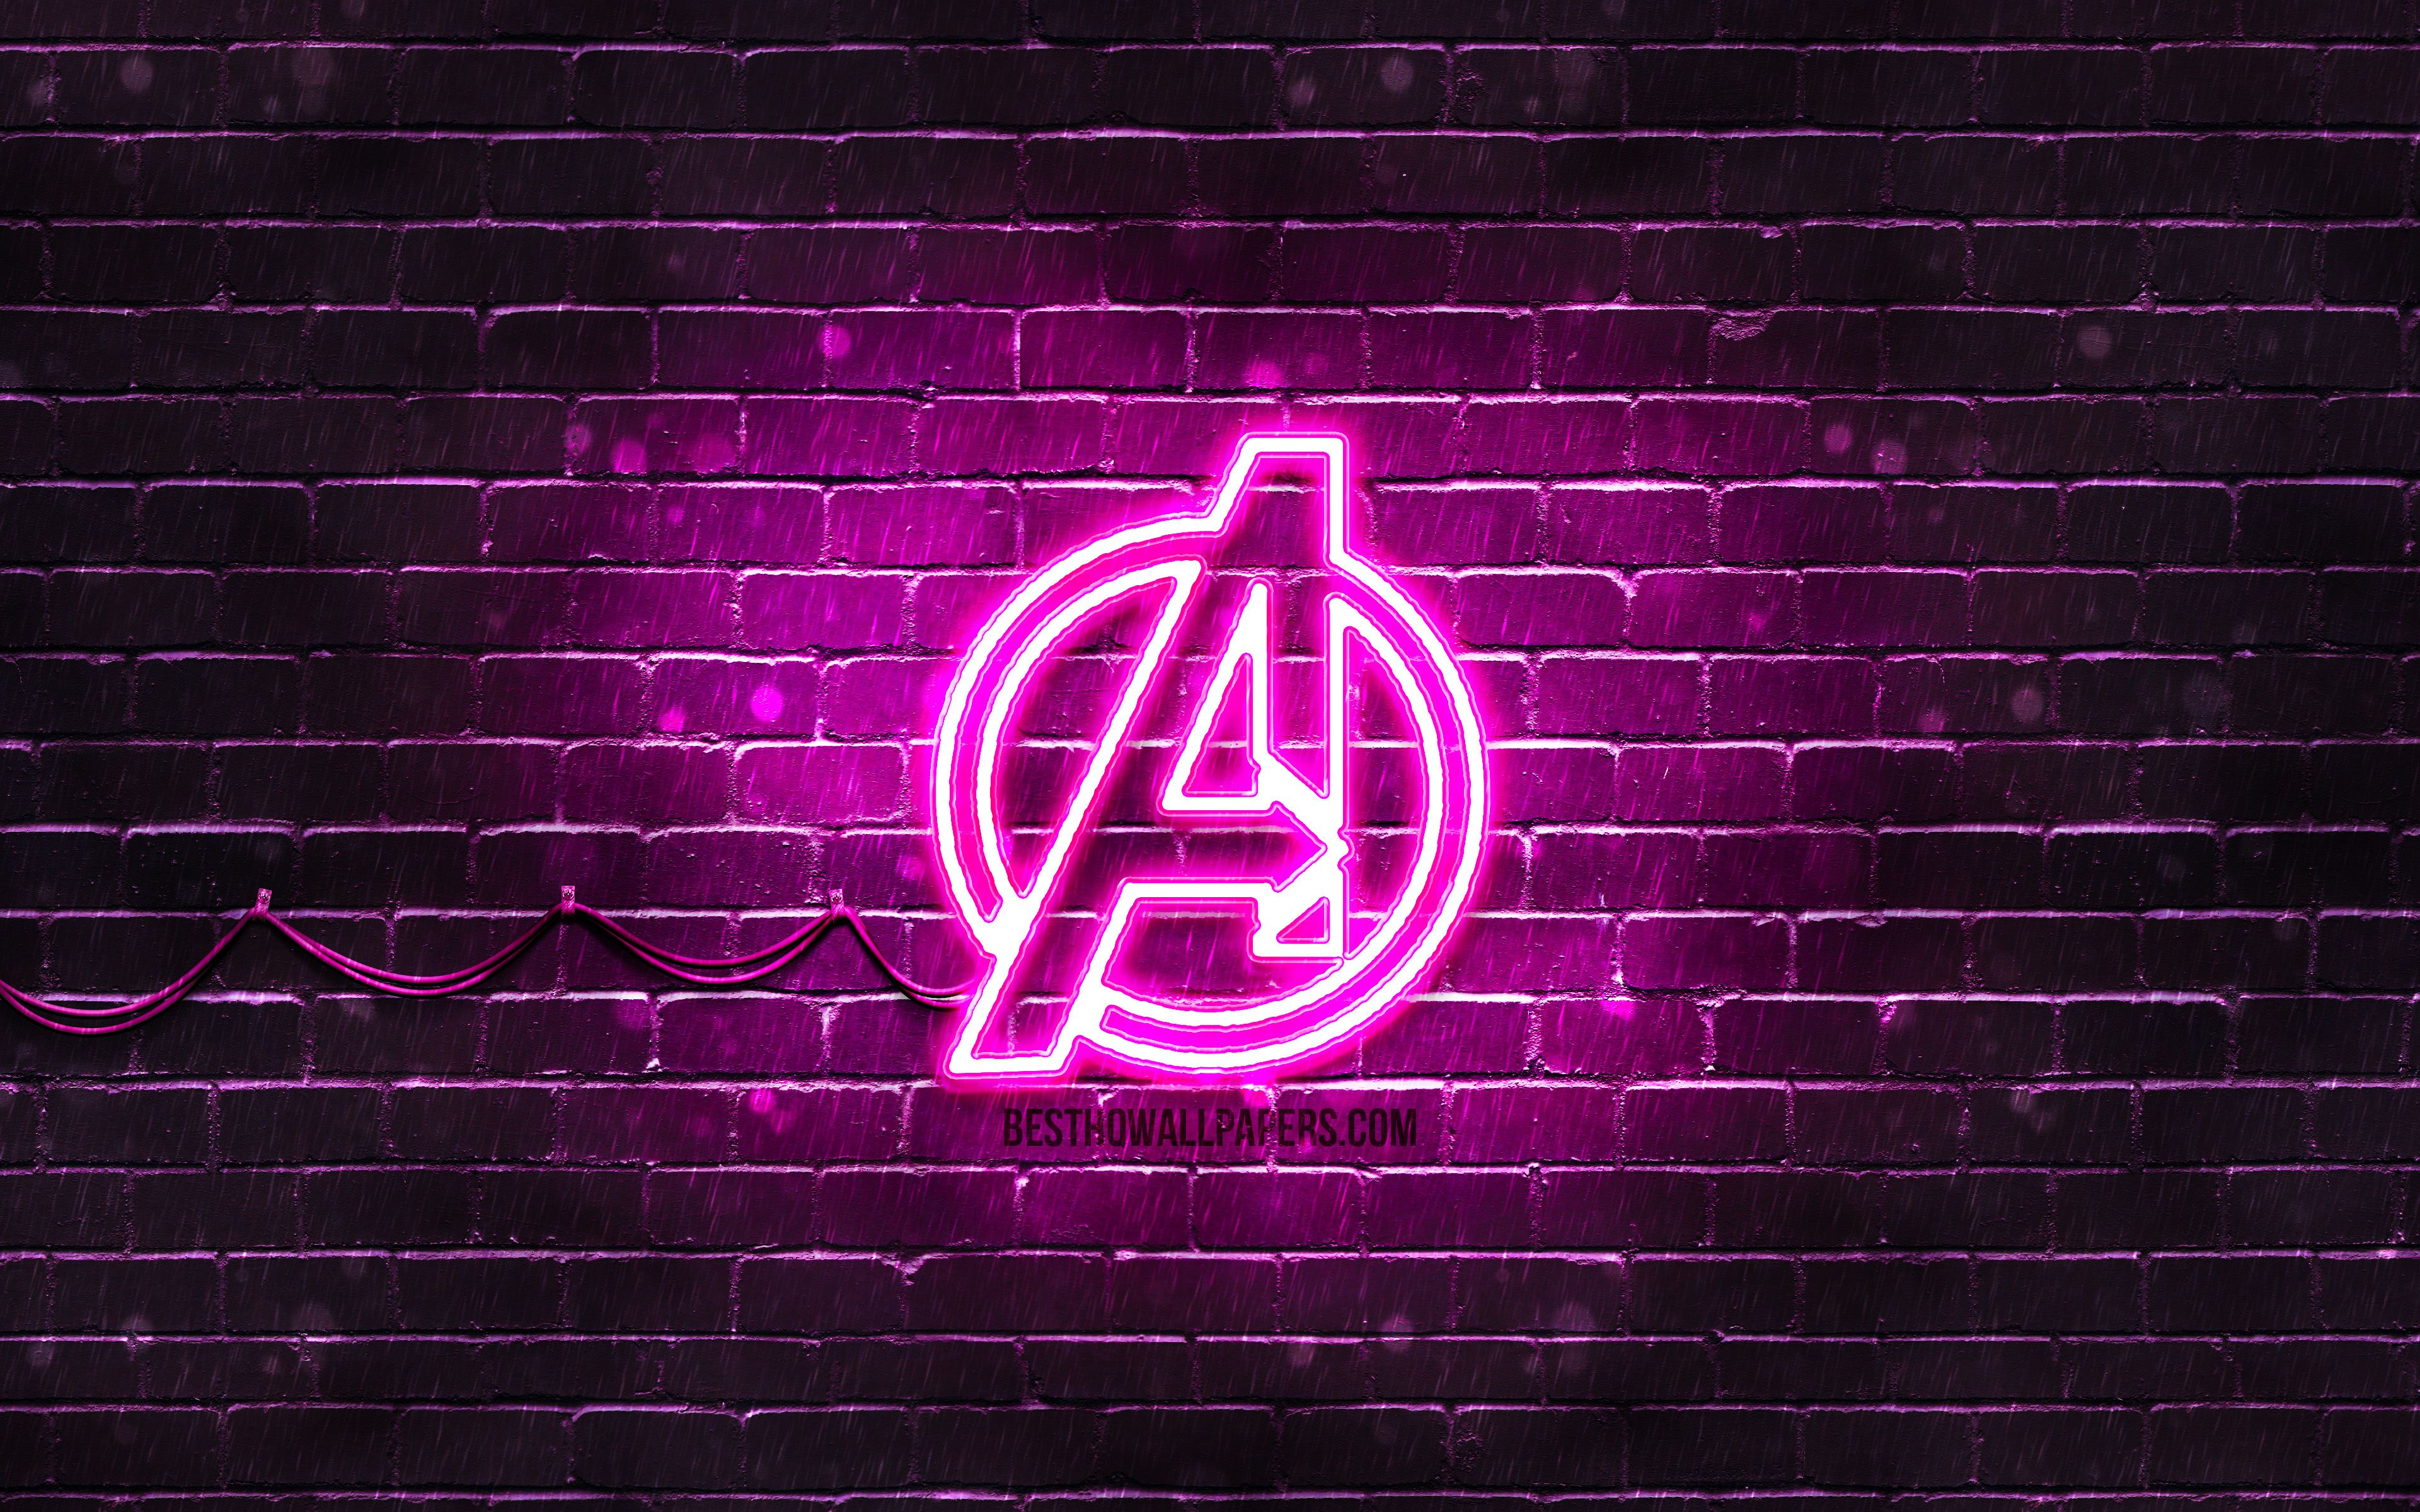 Download wallpaper Avengers purple logo, 4k, purple brickwall, Avengers logo, superheroes, Avengers neon logo, Avengers for desktop with resolution 3840x2400. High Quality HD picture wallpaper